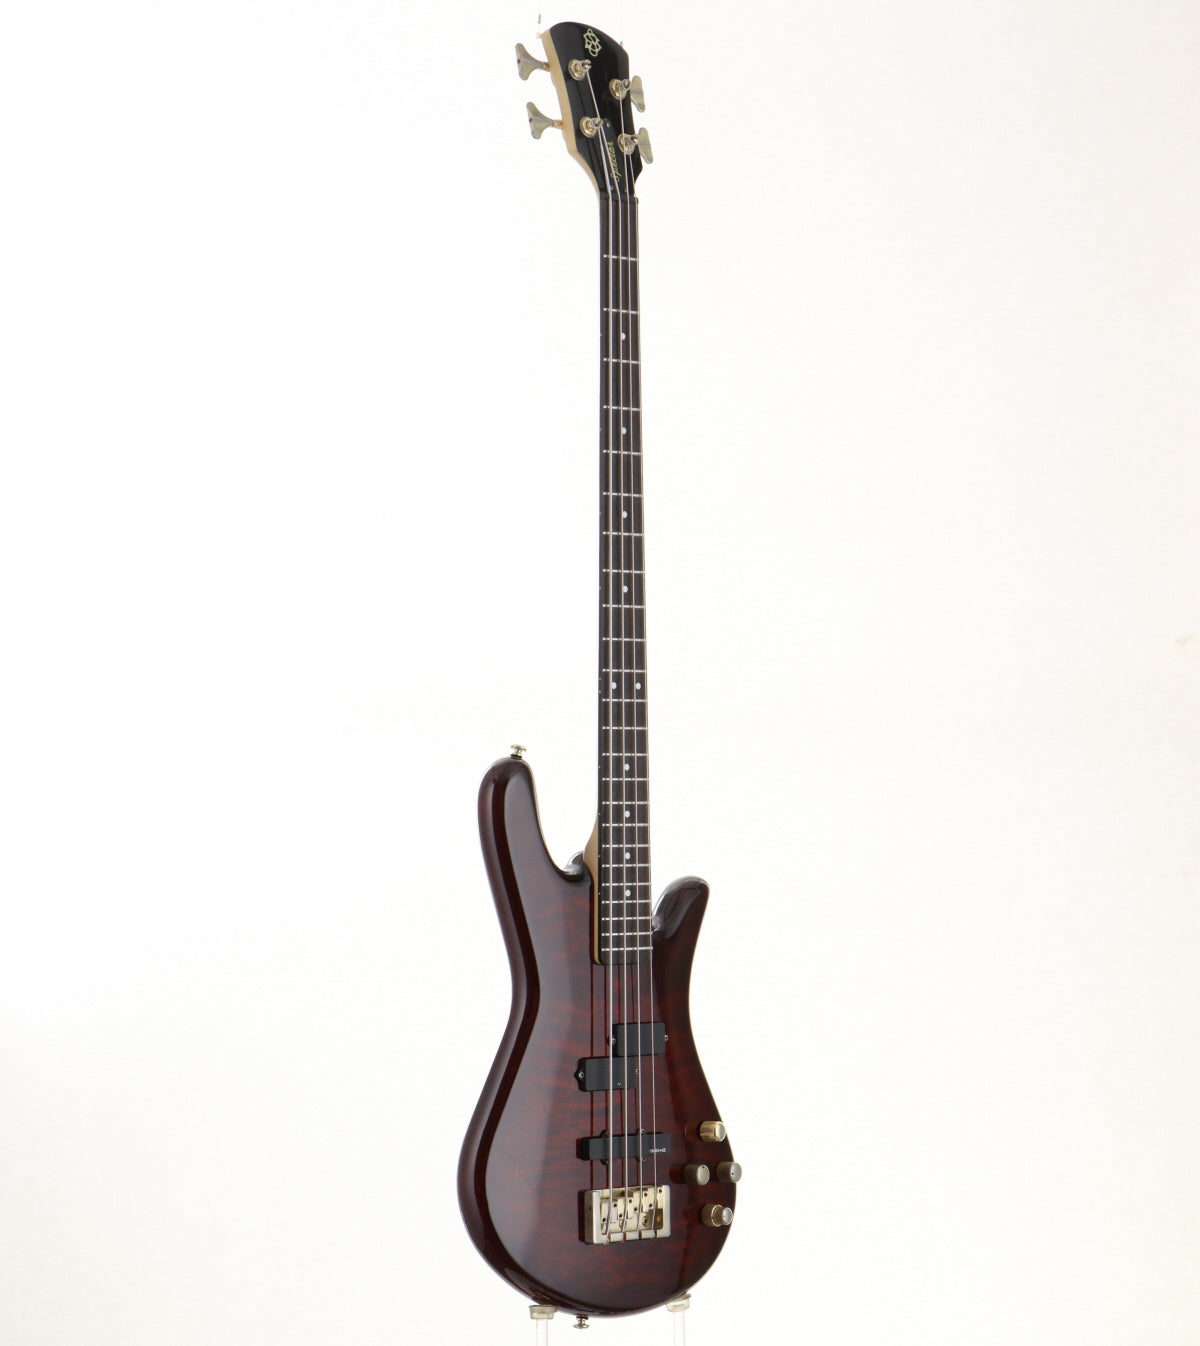 [SN 6389] USED Spector / Legend 4 Classic BC [06]